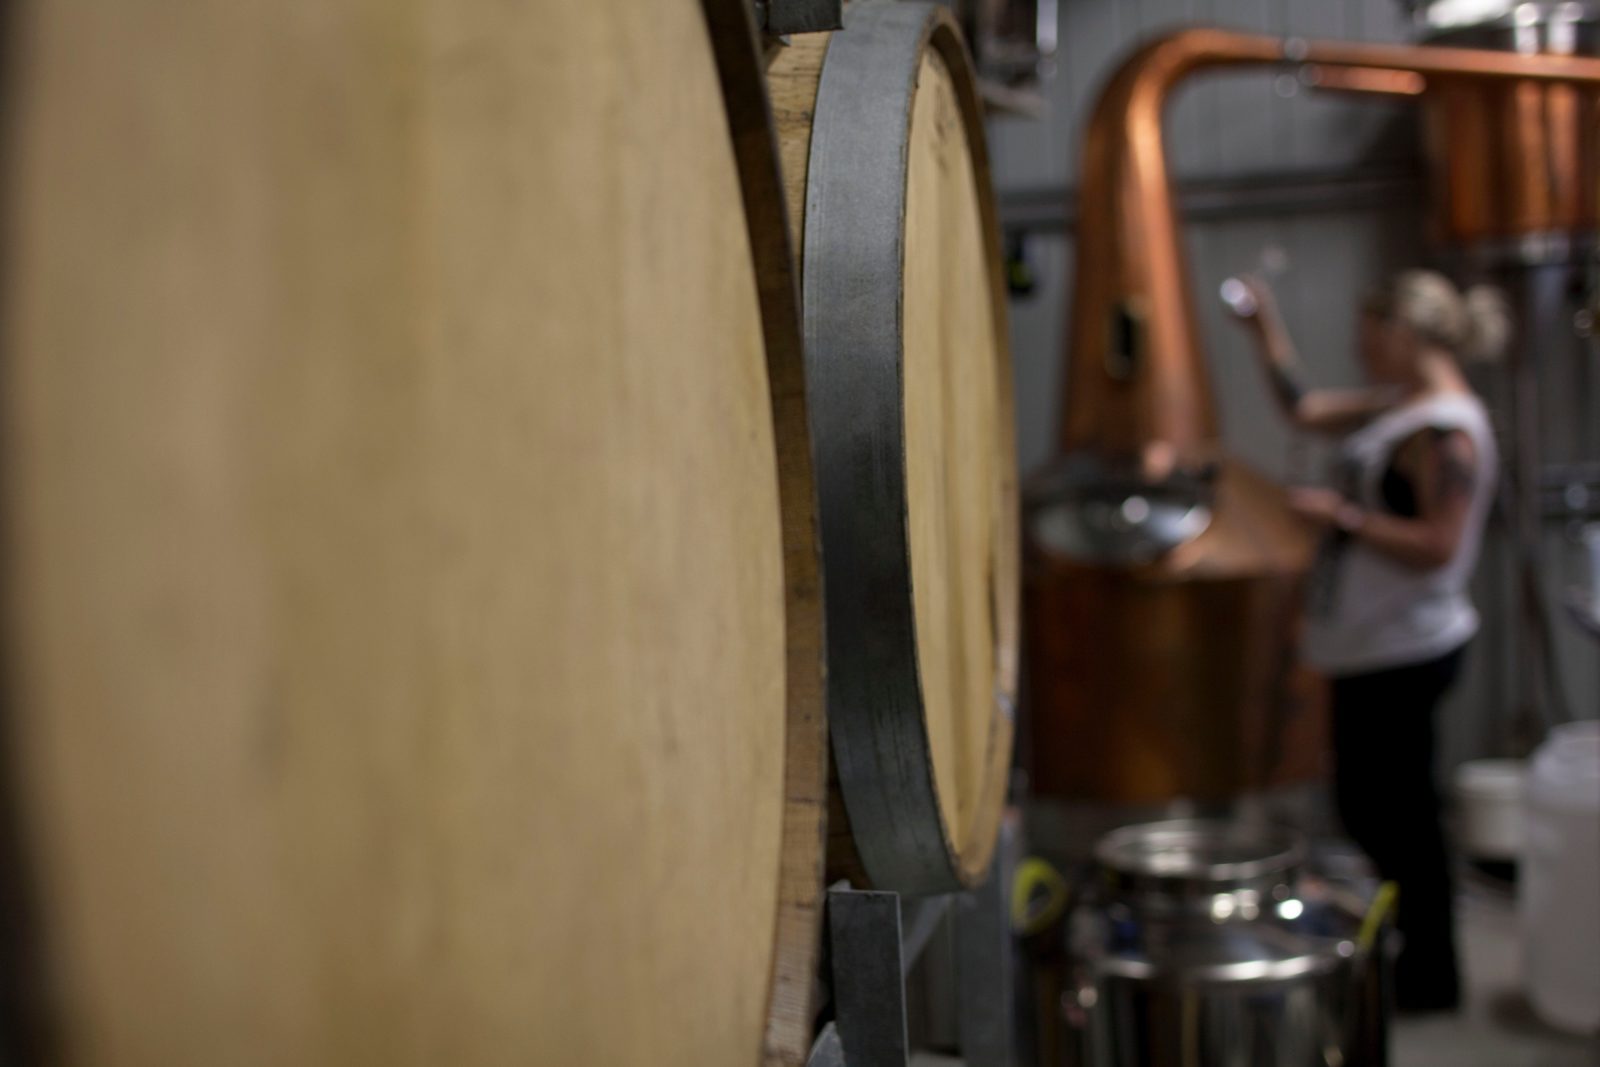 Rum barrels in the foreground with Ally distilling in the background.